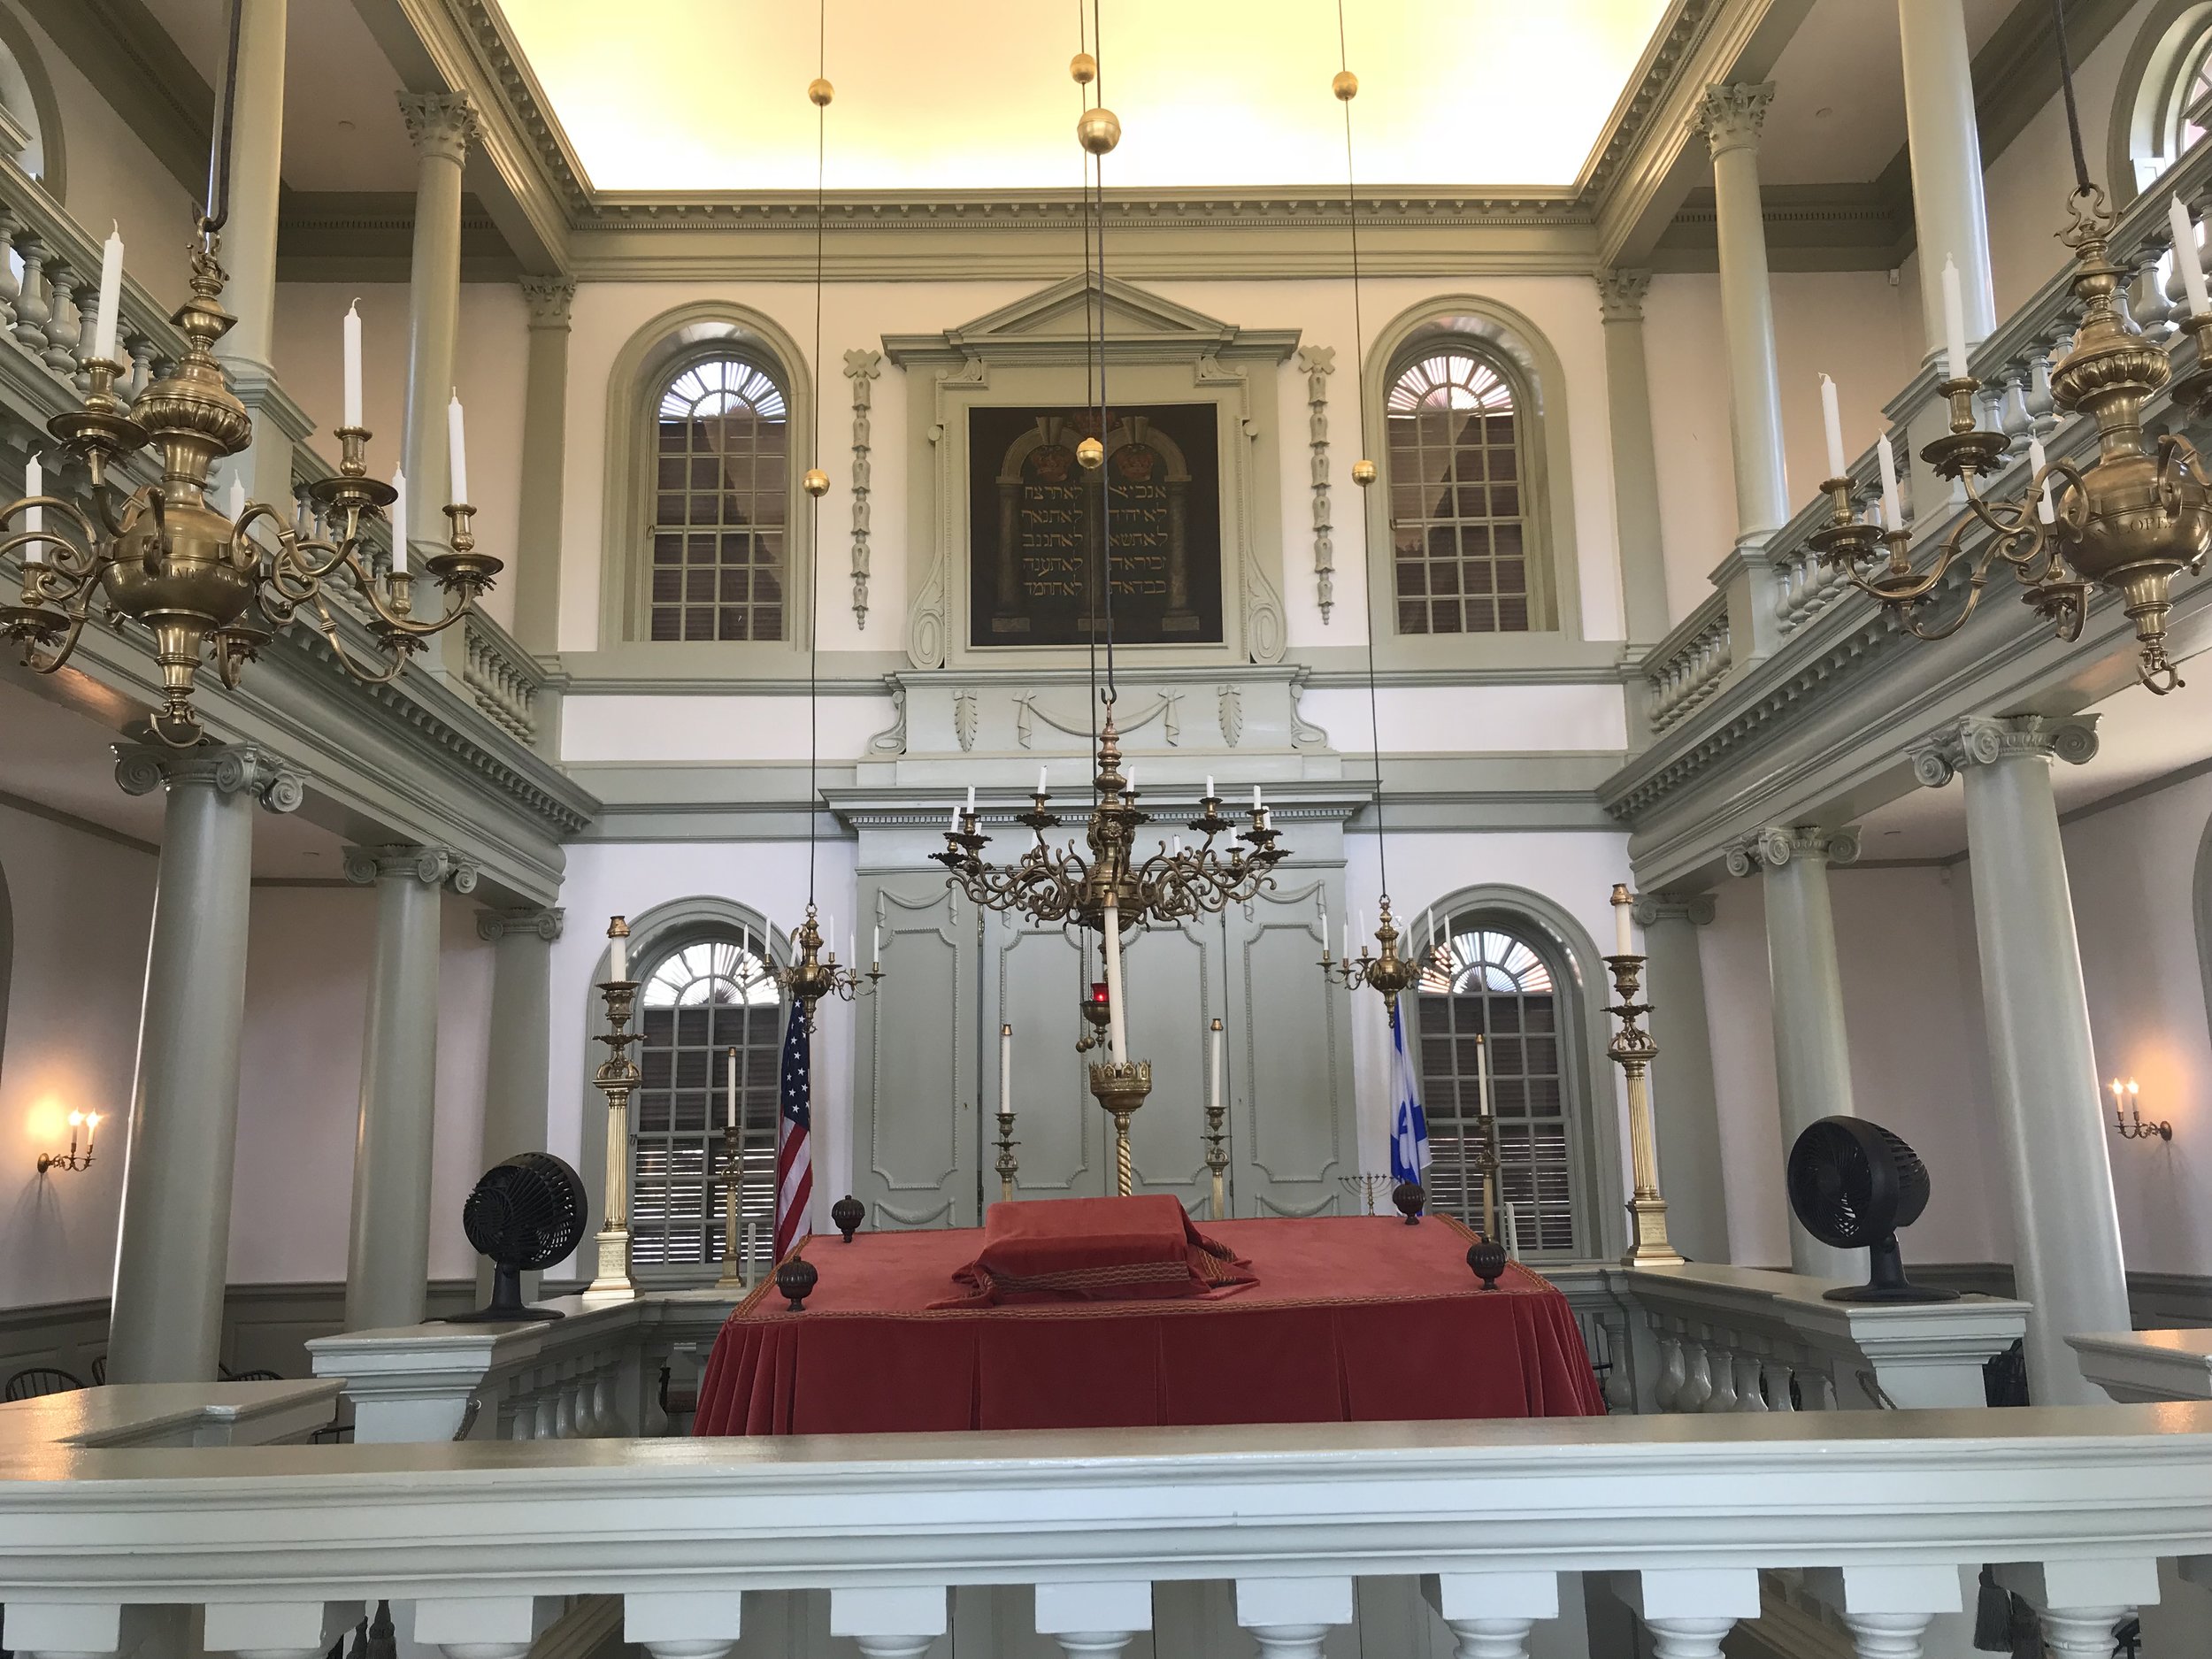  Touro Synagogue in Newport, R.I., still has an active, if small, congregation.      